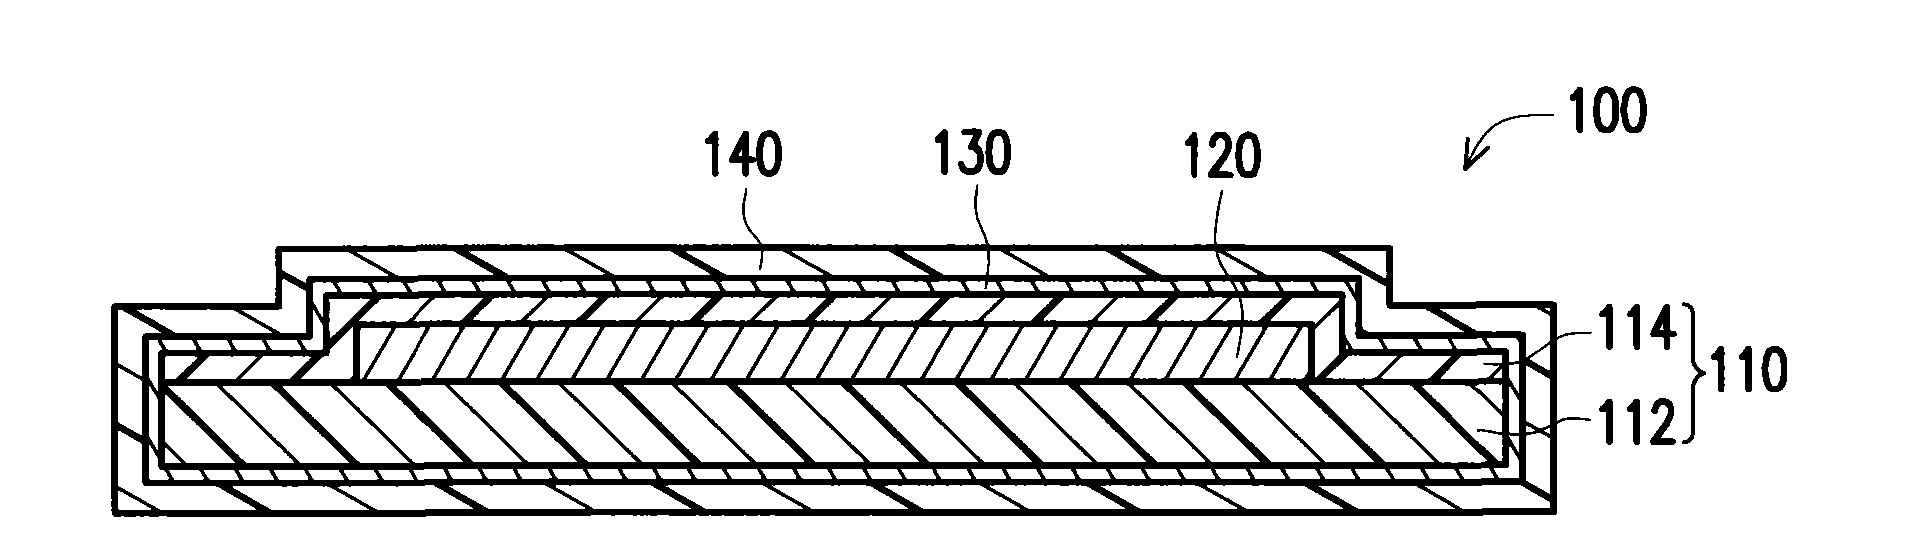 Flat coaxial cable and fabricating method thereof